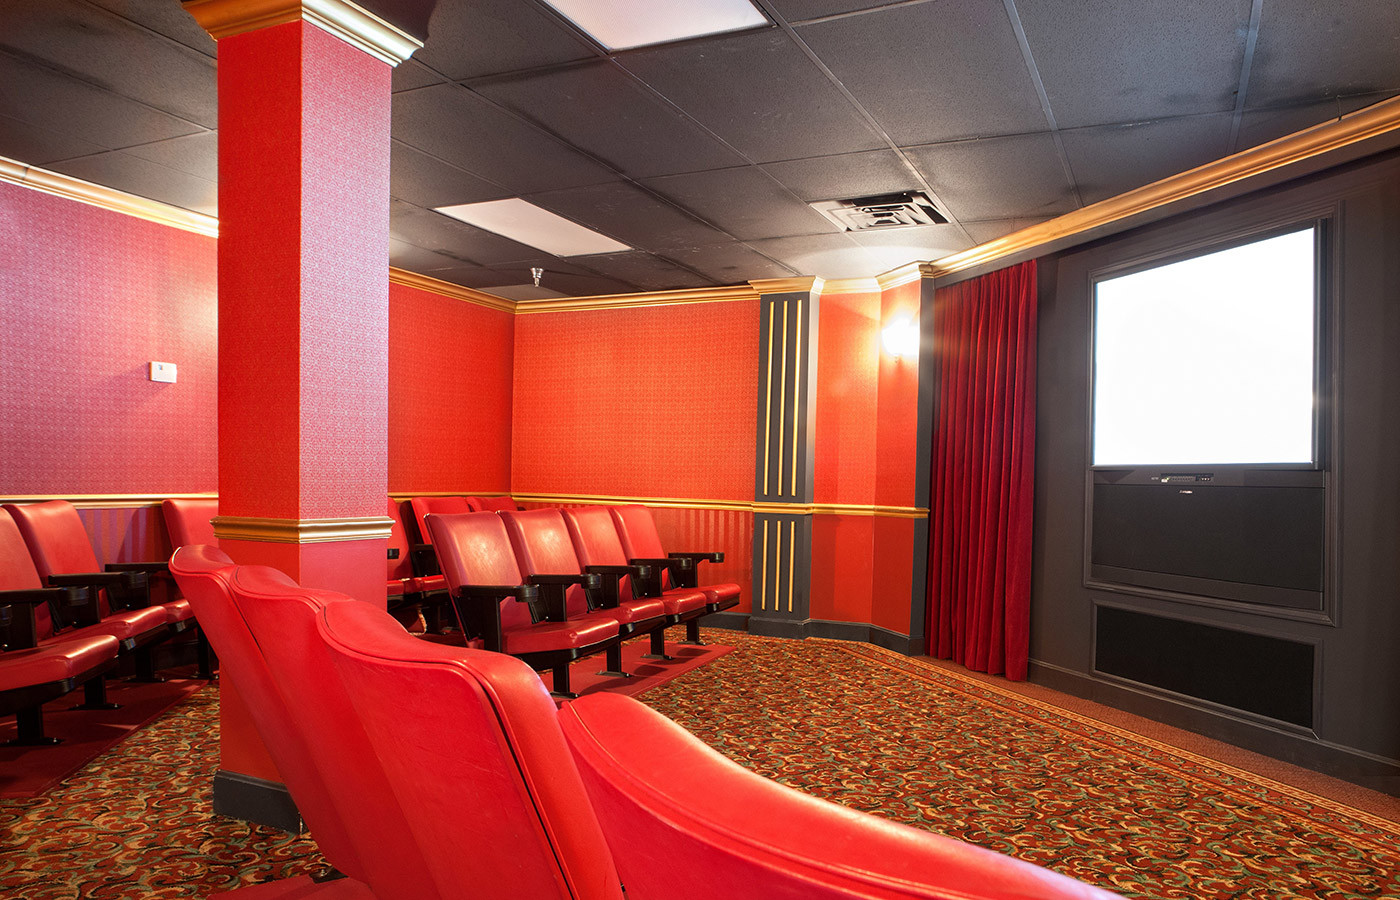 The movie theater at The Fountains at Greenbriar.